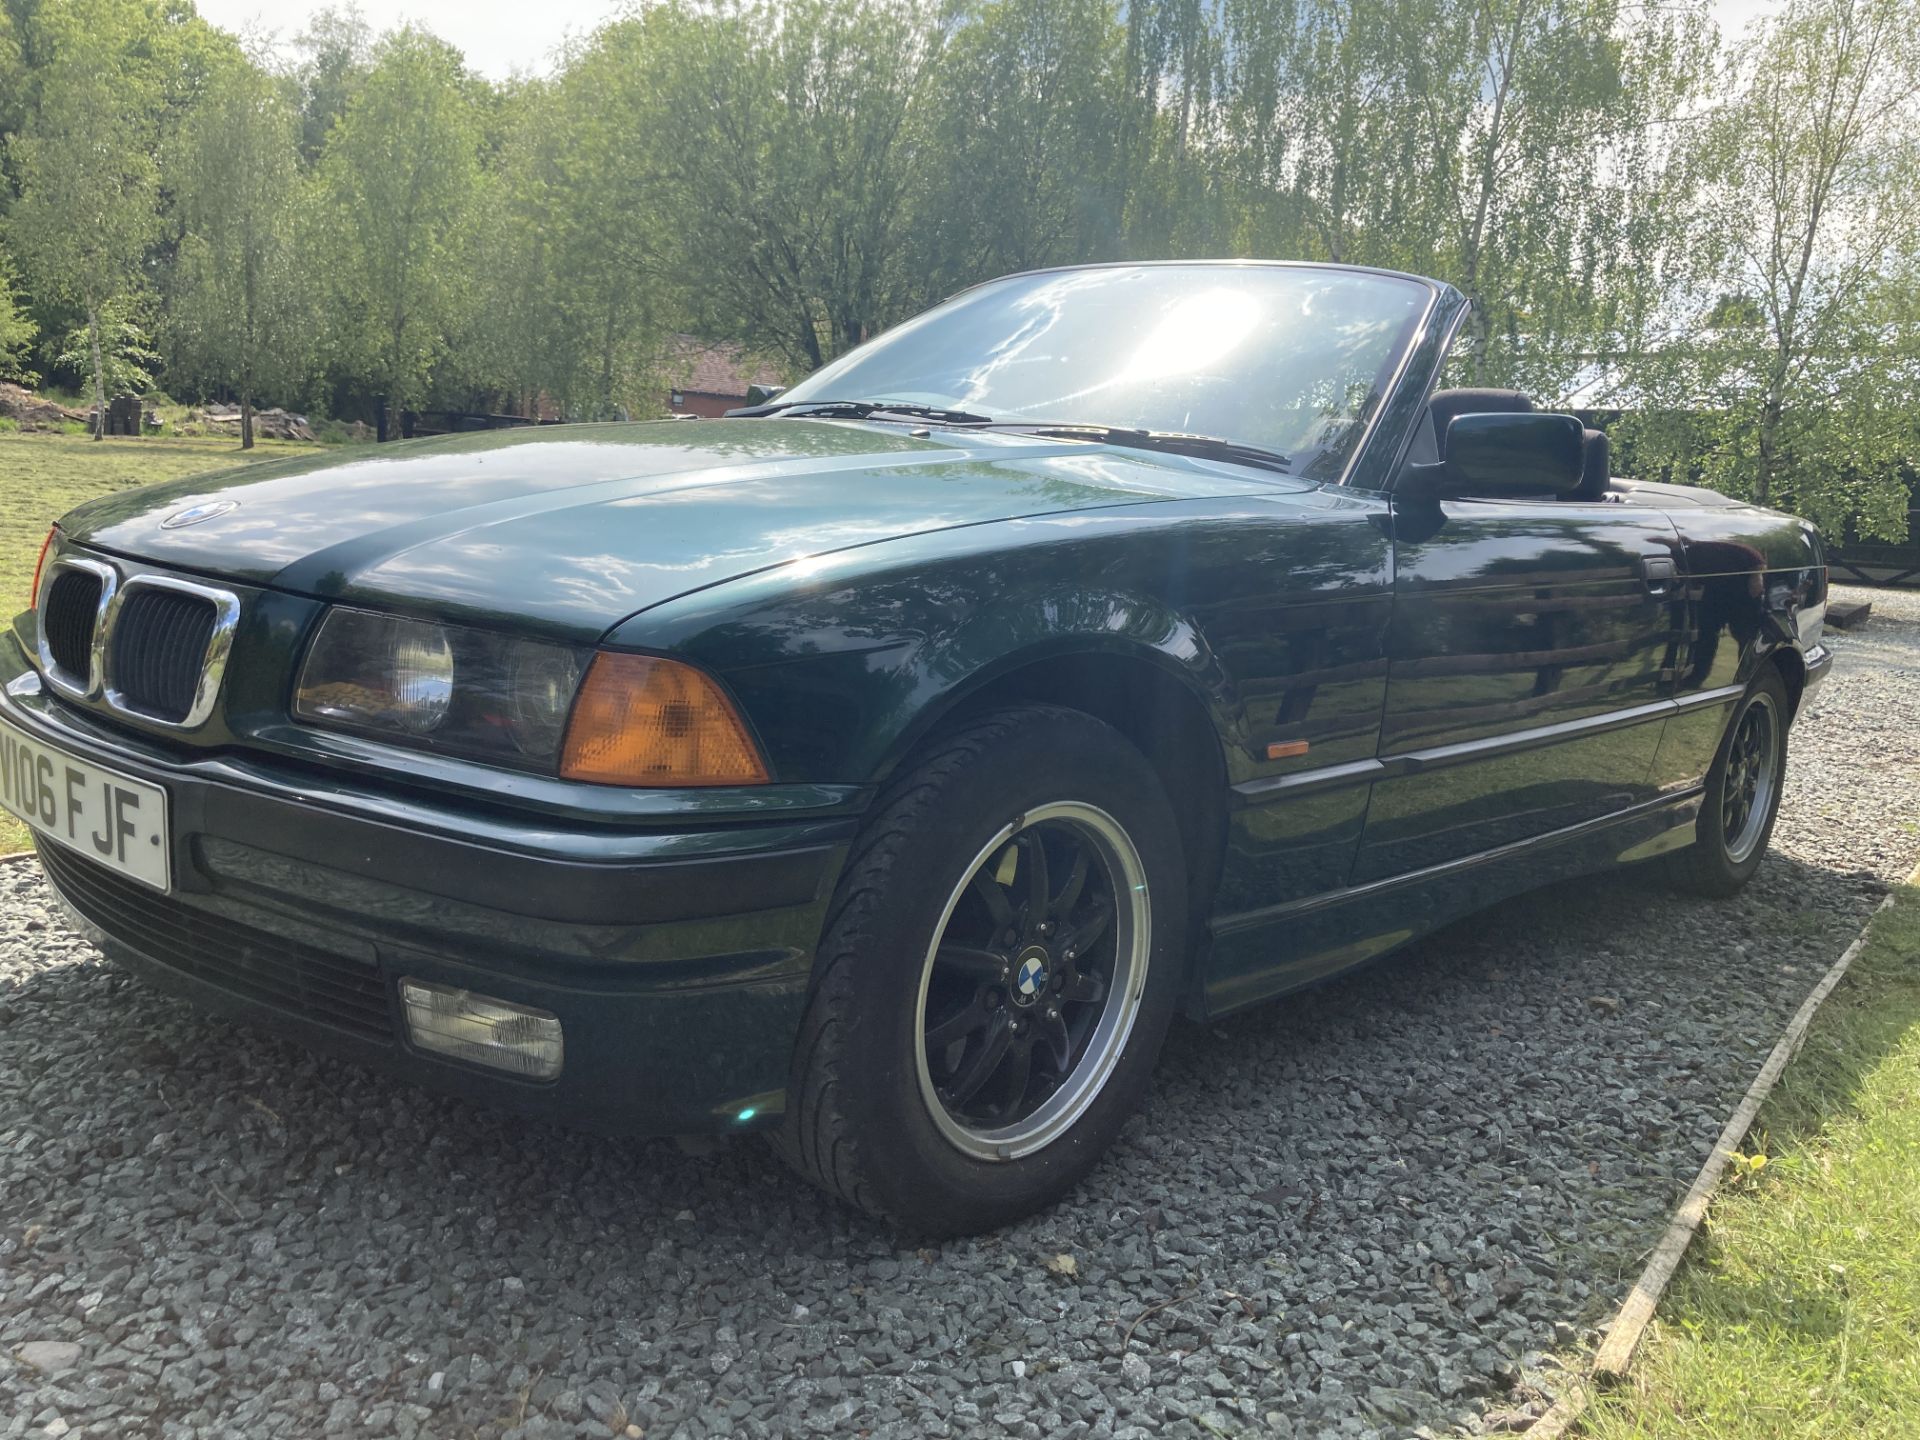 1999 BMW 318i Convertible - Image 4 of 7